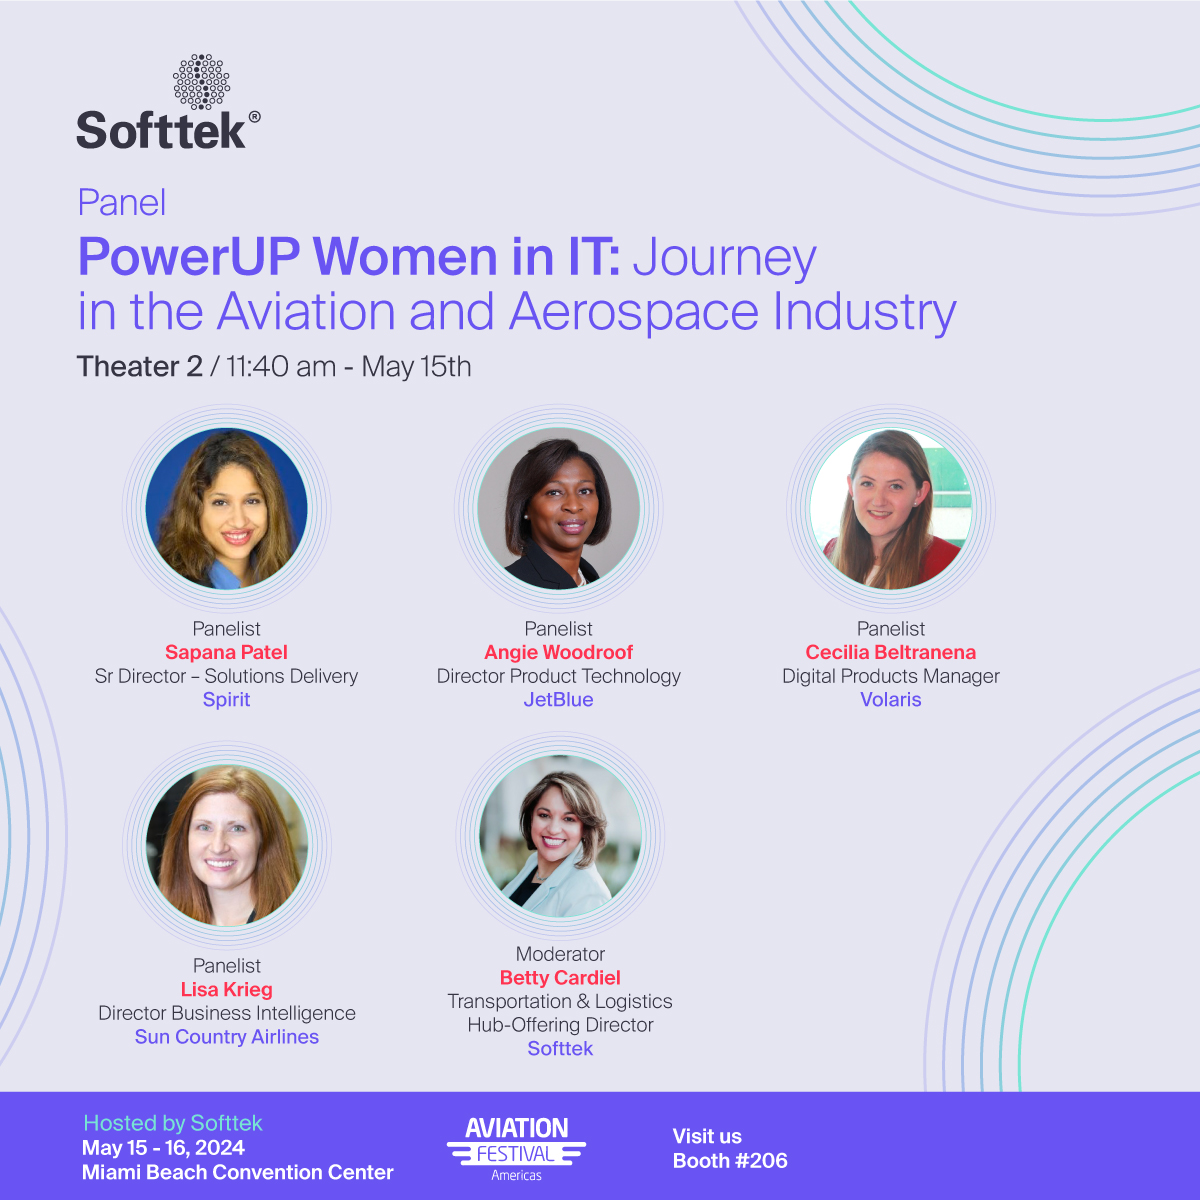 Calling all #aviation enthusiasts! ✈️

Don't miss out on the PowerUP Women IT Journey panel at Aviation Festival Americas 2024 tomorrow! Get all the details here 👉 bit.ly/3Wvs9mv
#WomeninAviation #AviationTech